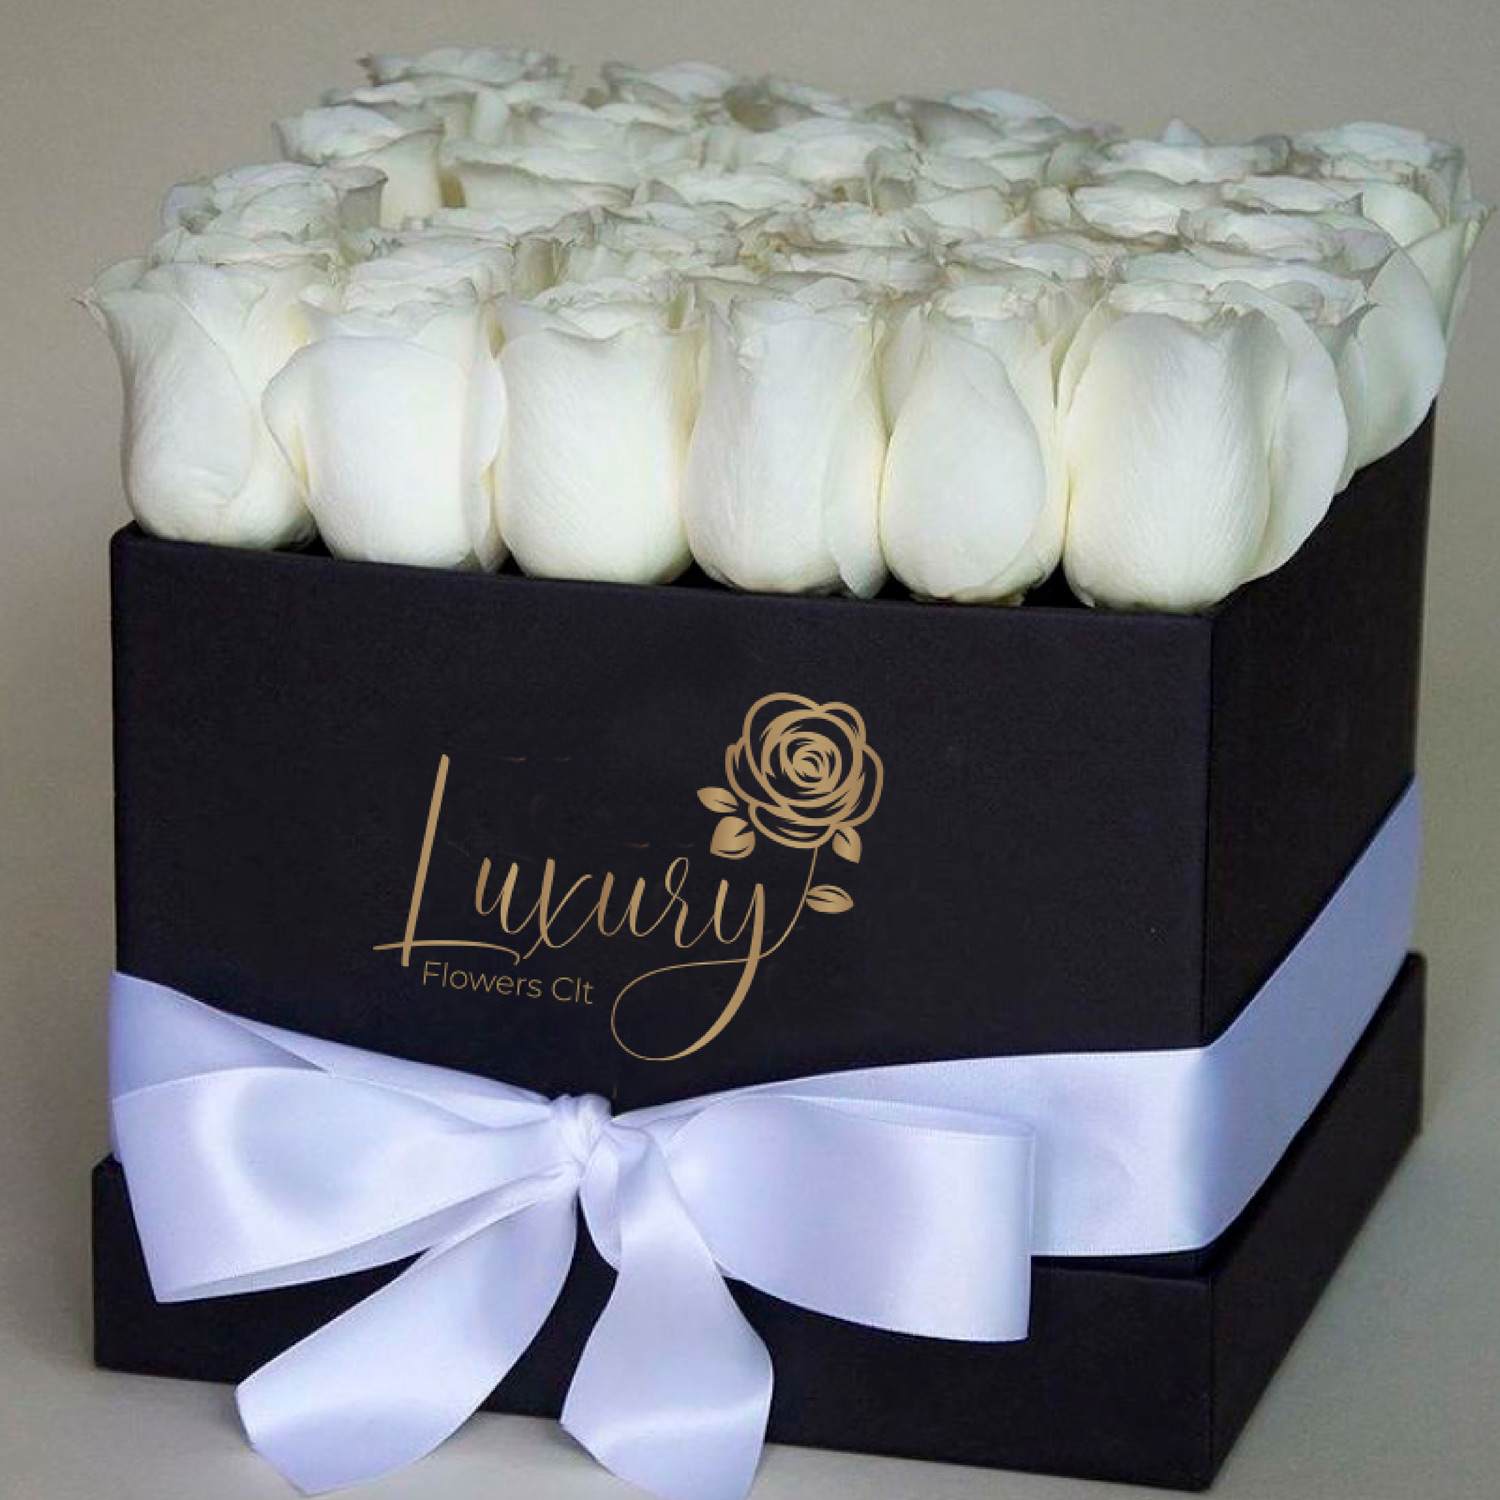 Forever Mine-White - •	Roses in Box: 24-30 stems of natural roses. •	Color Flower: White •	Color Box: White or Black (subject to inventory availability) •	All Occasion •	Place your Order Online Monday to Saturday before 1:00 p.m. (E.T.) for same-day          delivery.  •	“Orders received after hours will be delivered the next business day”. •	Check our coverage area. •	Occasionally, substitutions of flowers and/or containers happen due to weather,          seasonality, and market conditions which may affect availability. If this is the case with          the gift you’ve selected, we will ensure that the style, theme, and color scheme of your          arrangement are preserved and will only substitute items of equal value or higher value.  CARE INSTRUCTIONS Gently mist the arrangement with natural water every other day. Do not spray any cleaning product on the flower arrangement. Do not place heavy objects directly on the flower arrangement. Keep them out of direct sunlight and extreme heat. 